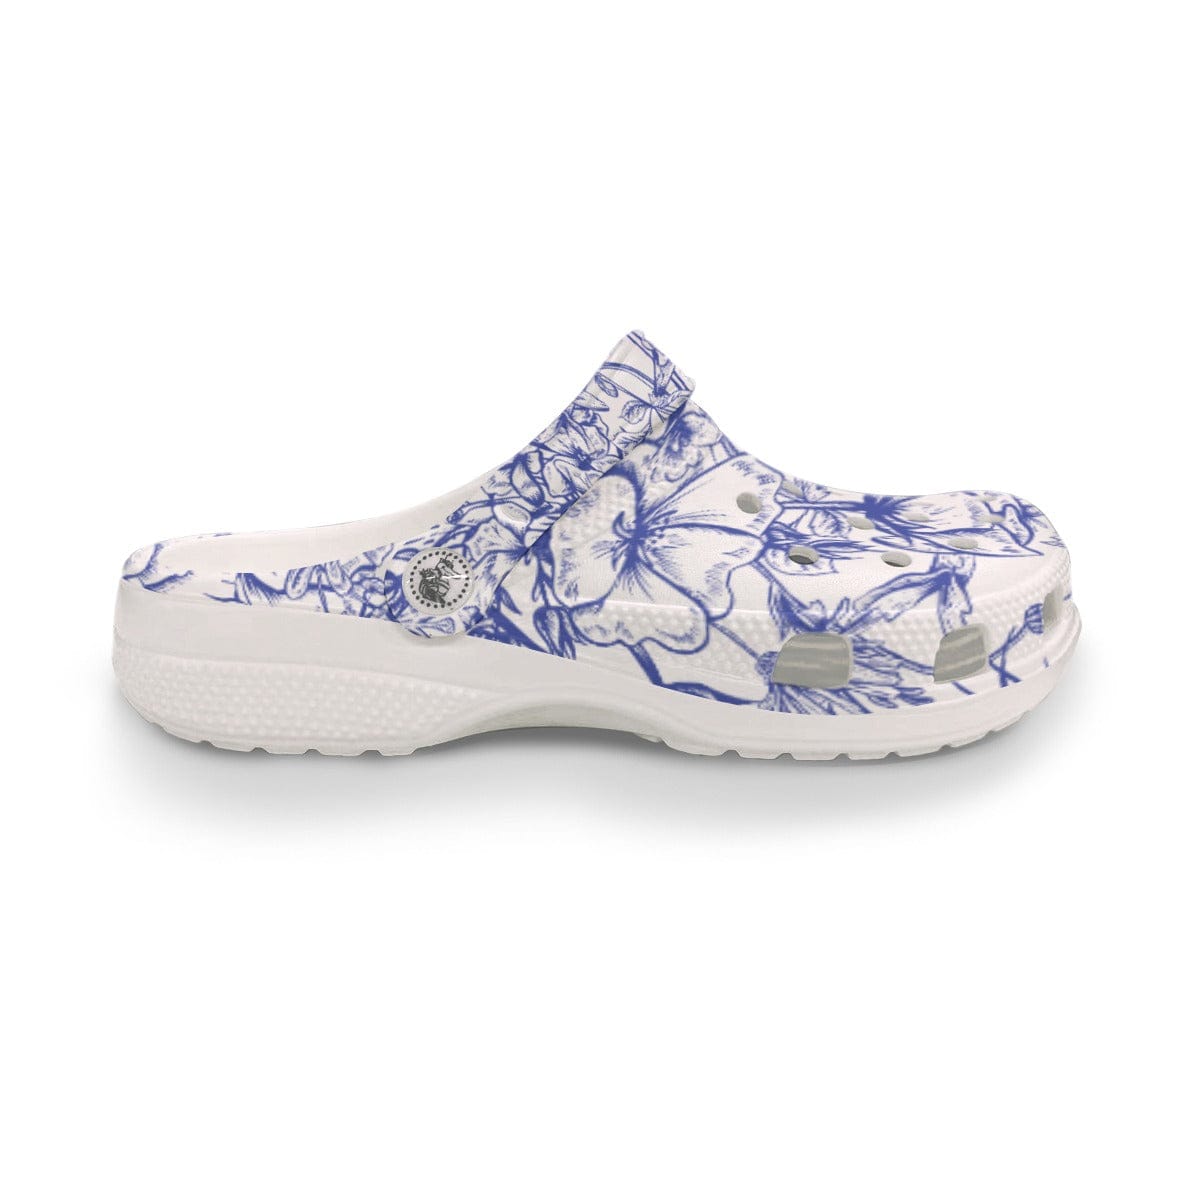 Yoycol Pedal Pops Periwinkle Luxe - Print Women's Classic Clogs